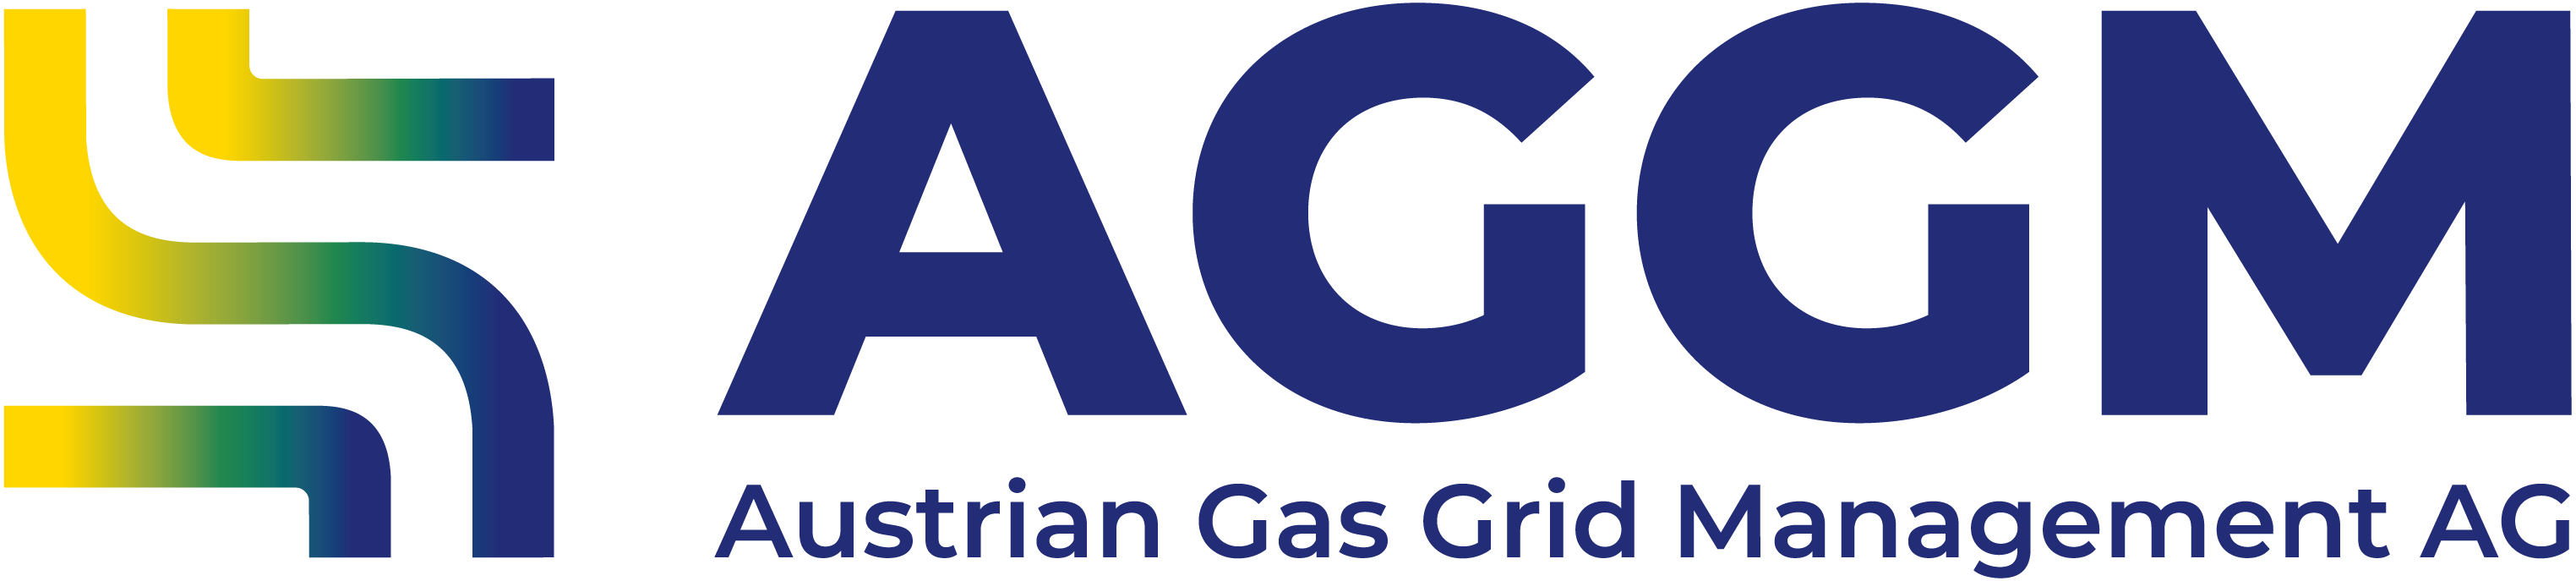 Featured image for “Austrian Gas Grid Management GmbH”